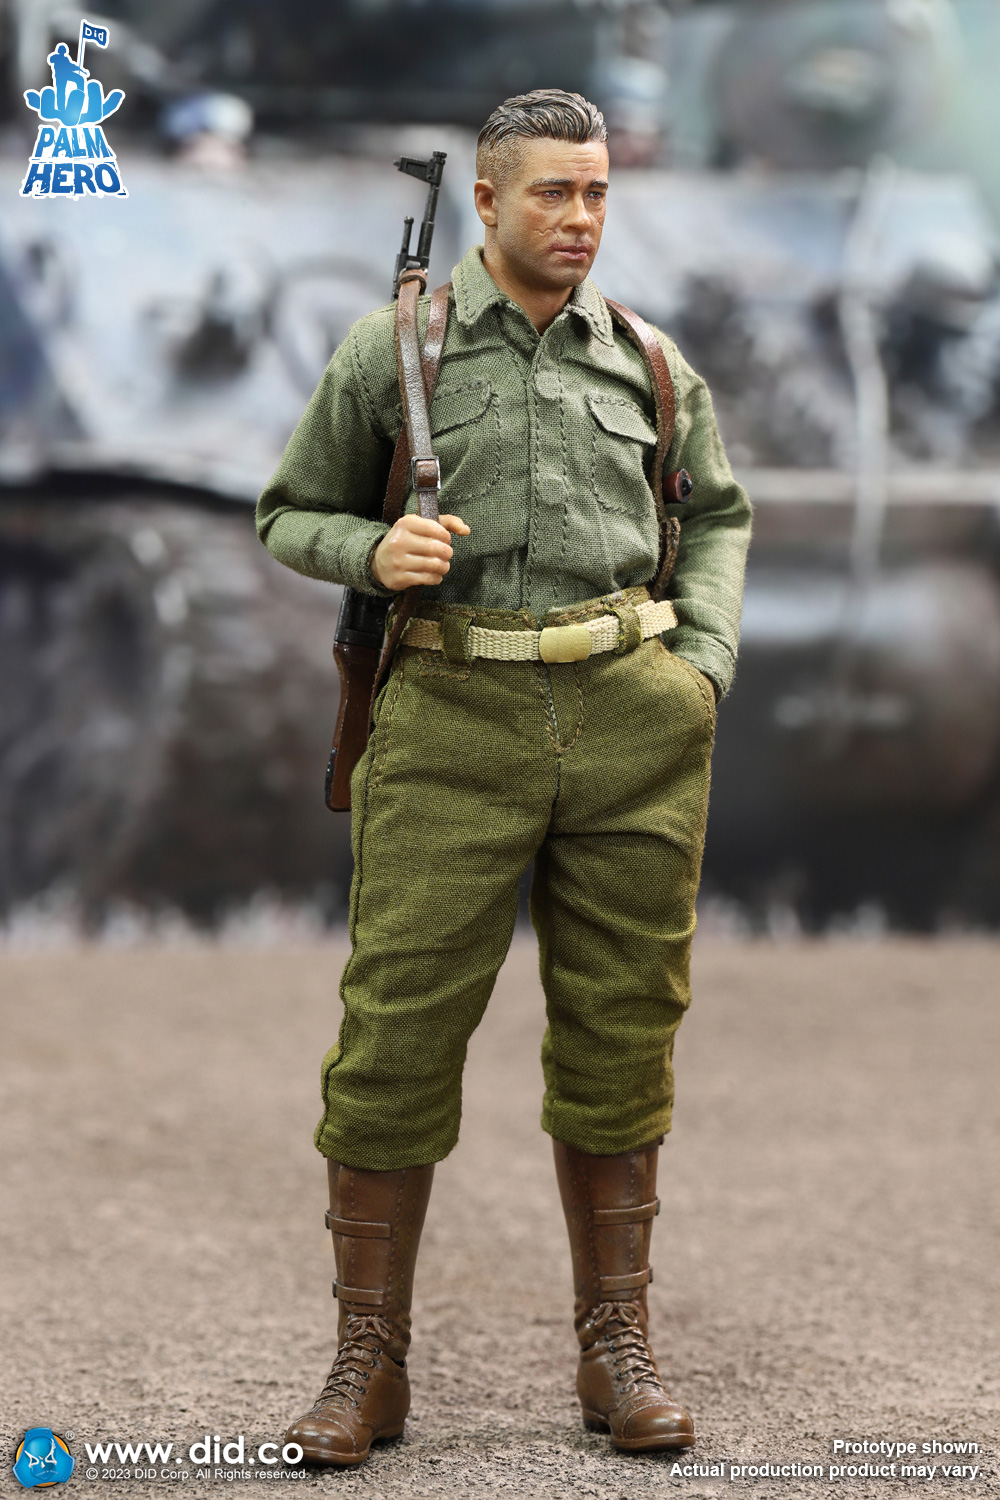 PalmHero - NEW PRODUCT: DID - 1/12 Pocket Hero Series Commander "Sherman" of the Second Armored Division of the US Army in World War II (#XA80019) 0616